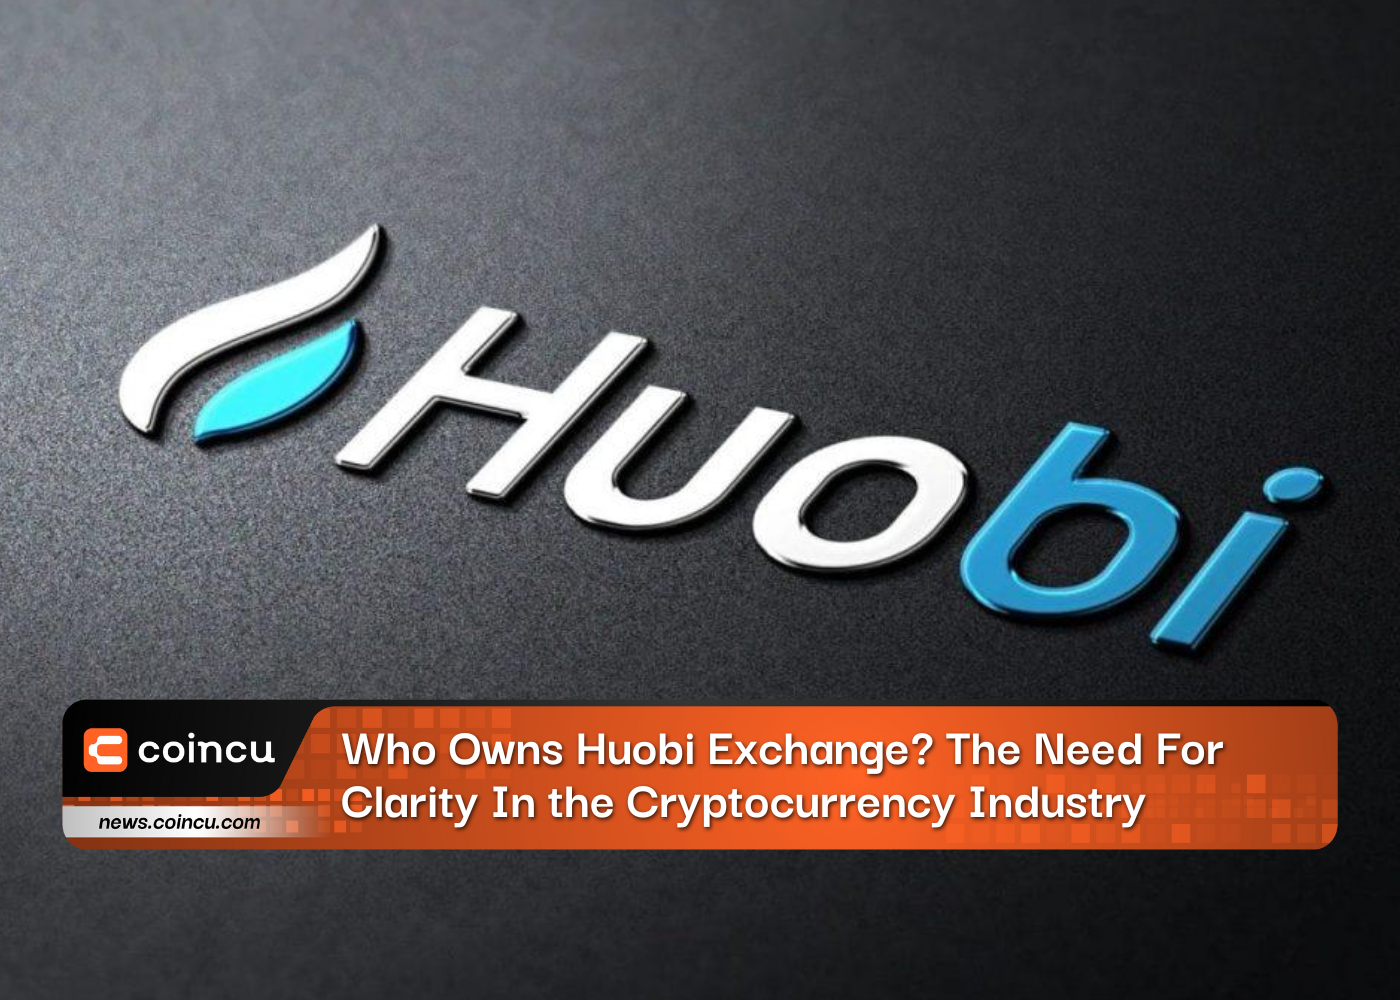 Who Owns Huobi Exchange? The Need For Clarity In The Cryptocurrency Industry